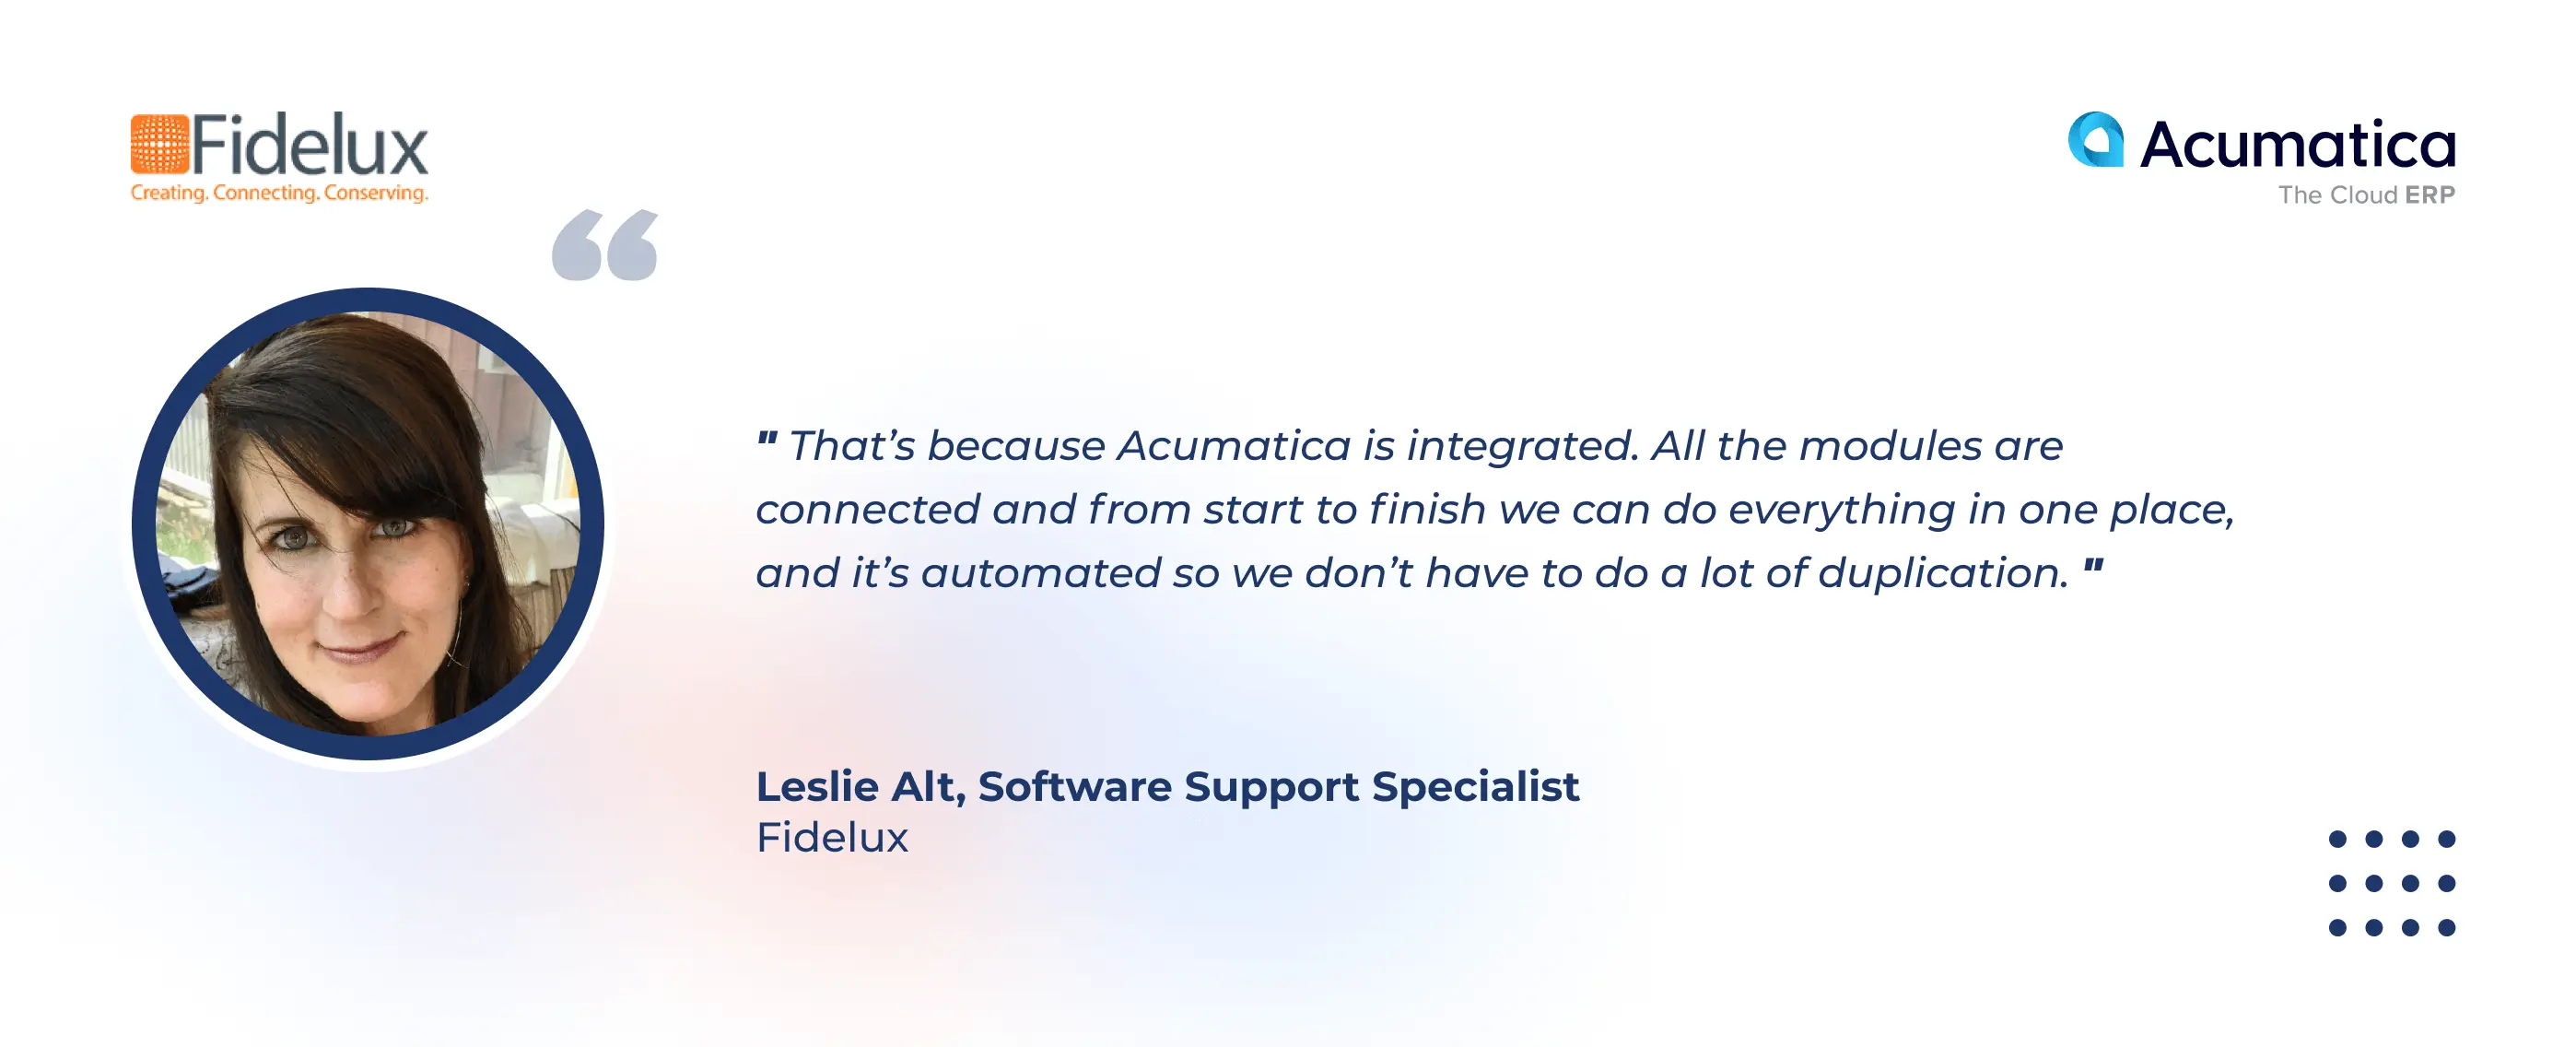 A quote of Leslie Alt, Software Support Specialist, about Acumatica Cloud ERP